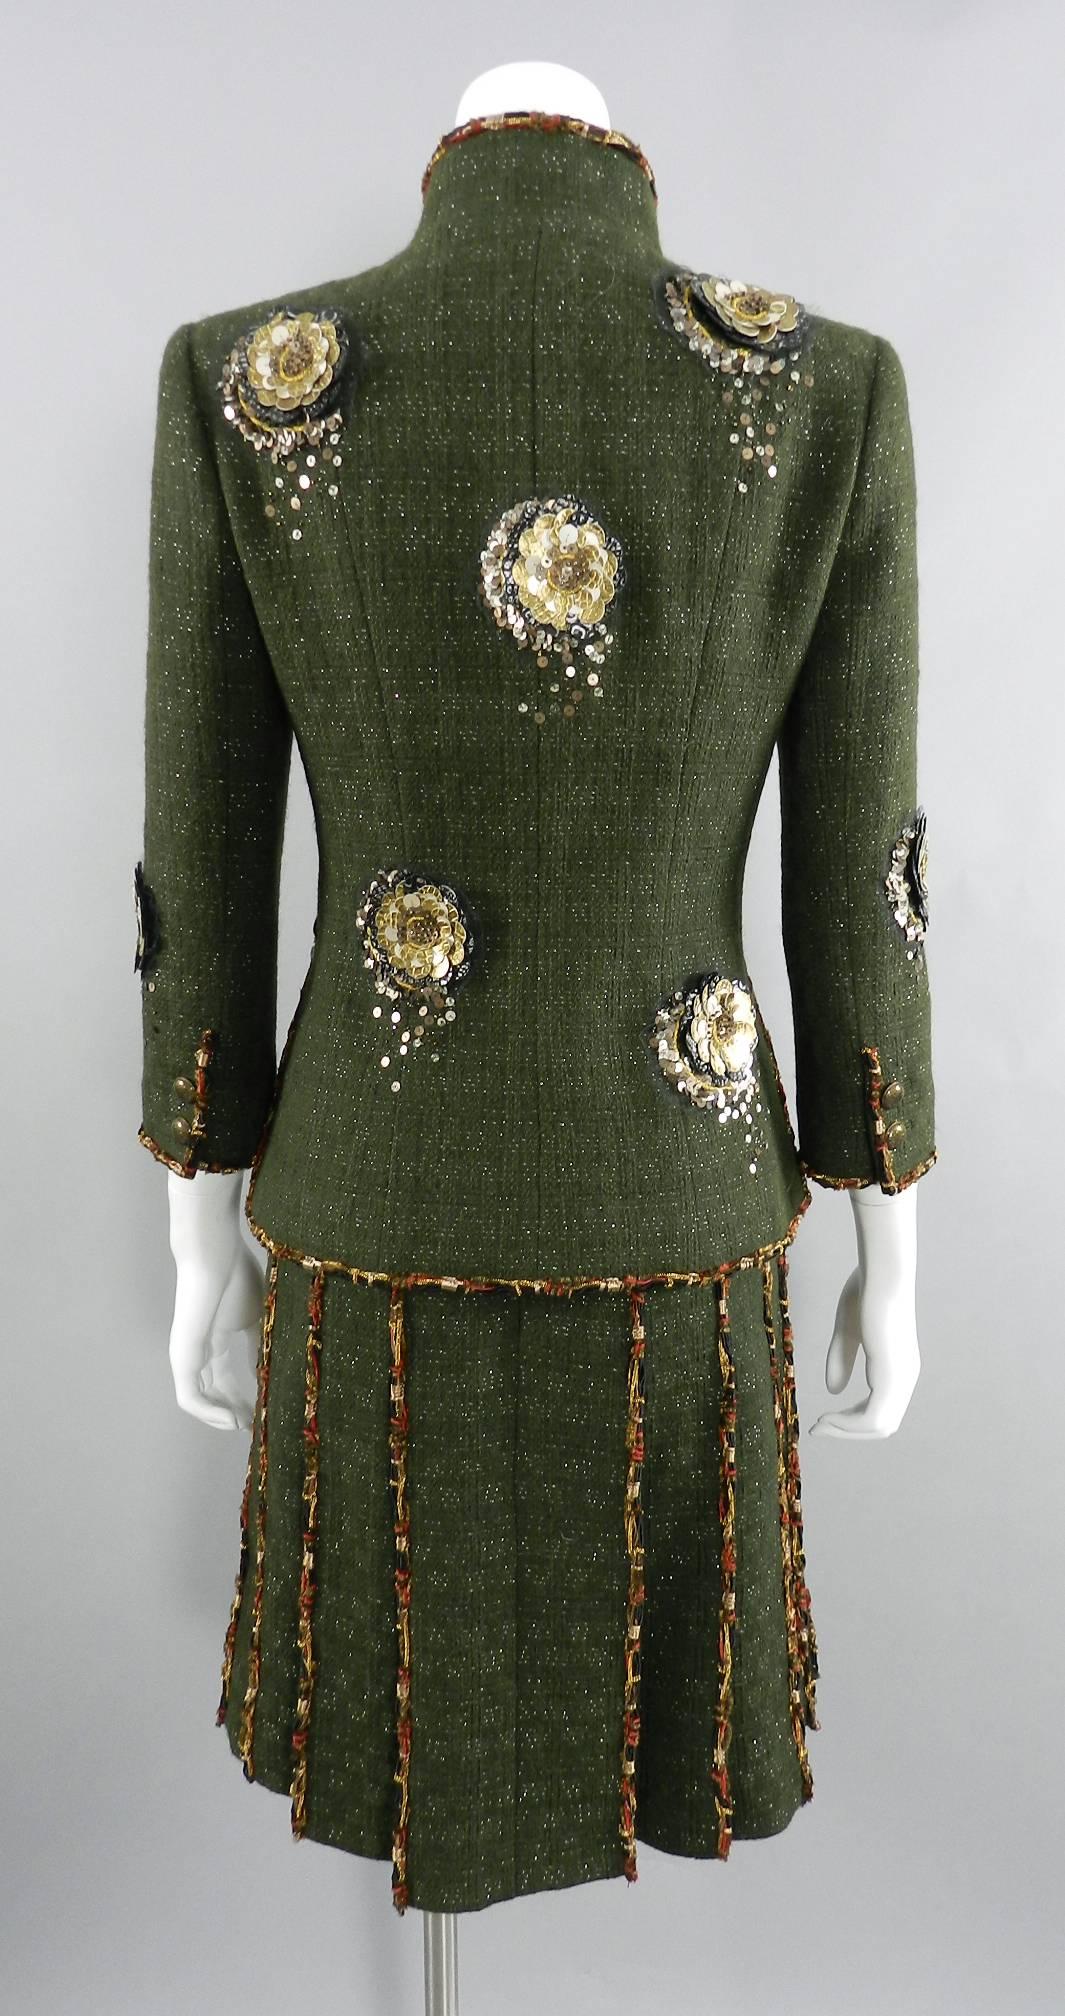 Chanel Pre-Fall 2010 Shanghai Runway Green skirt Suit with Gold Lesage Camelias 2